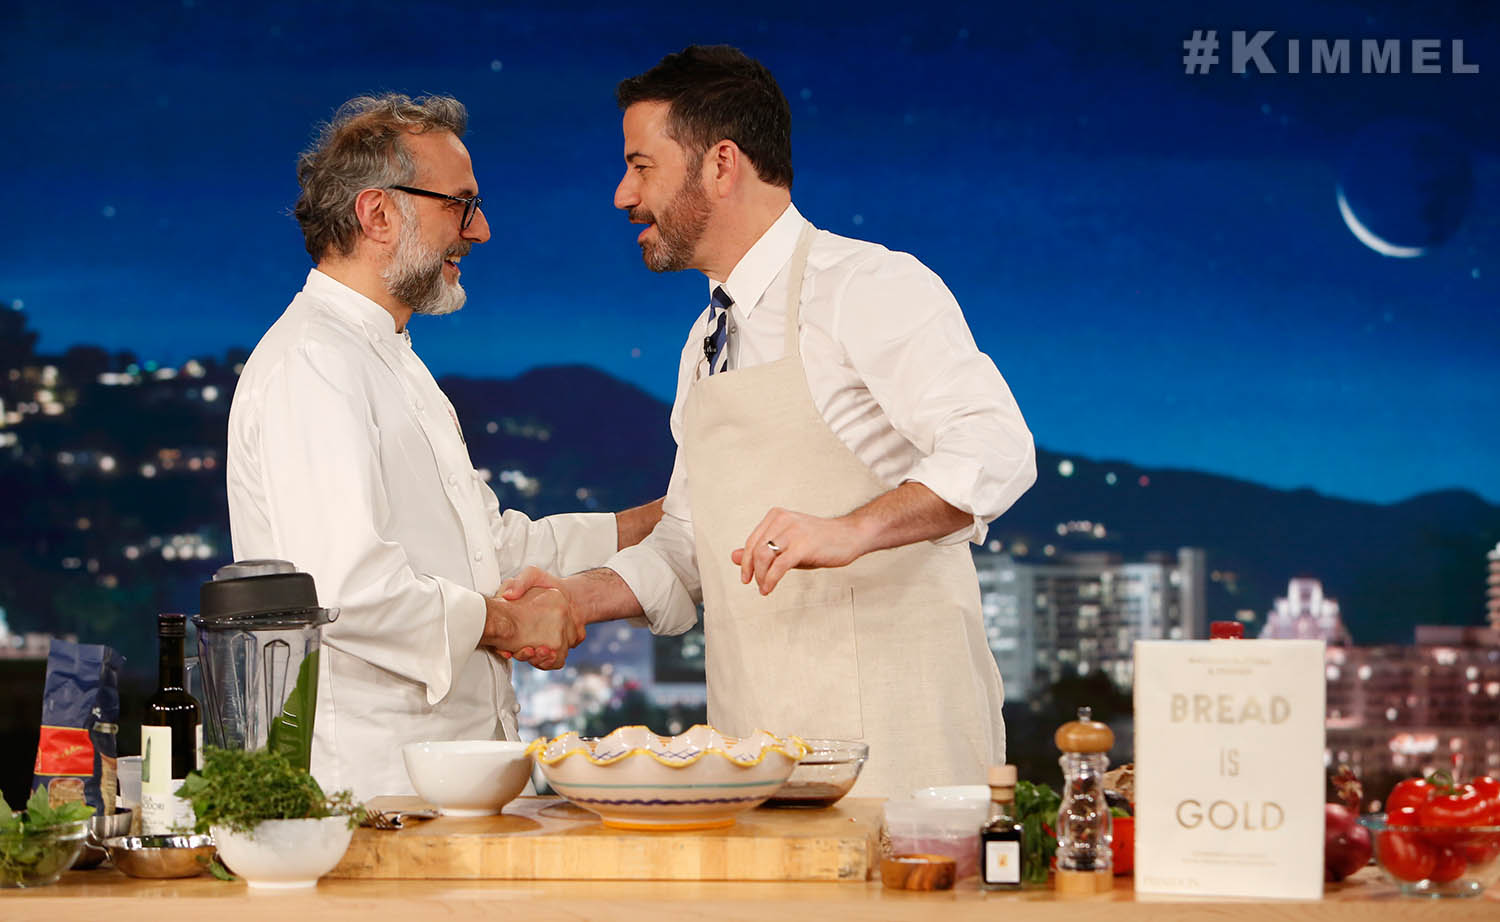 Massimo and Jimmy Kimmel on the show last night